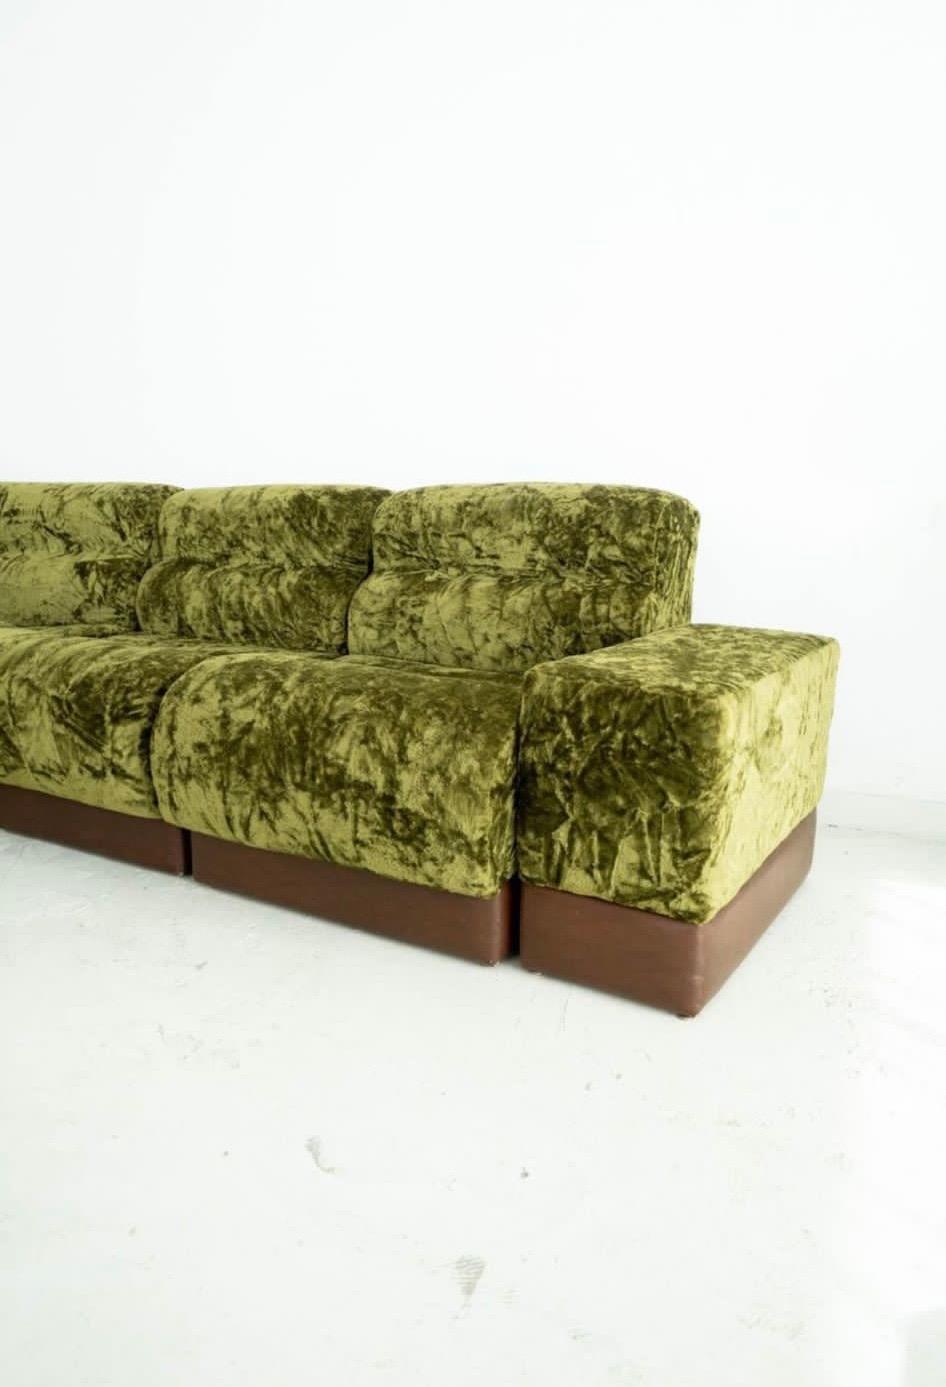 Nice green velvet modular sofa with many possibilities. You can combine as you want, each section could be shown as a simple lounge chair. The corner also could be presented where you want to have a different shape of sofa. Amazing original green